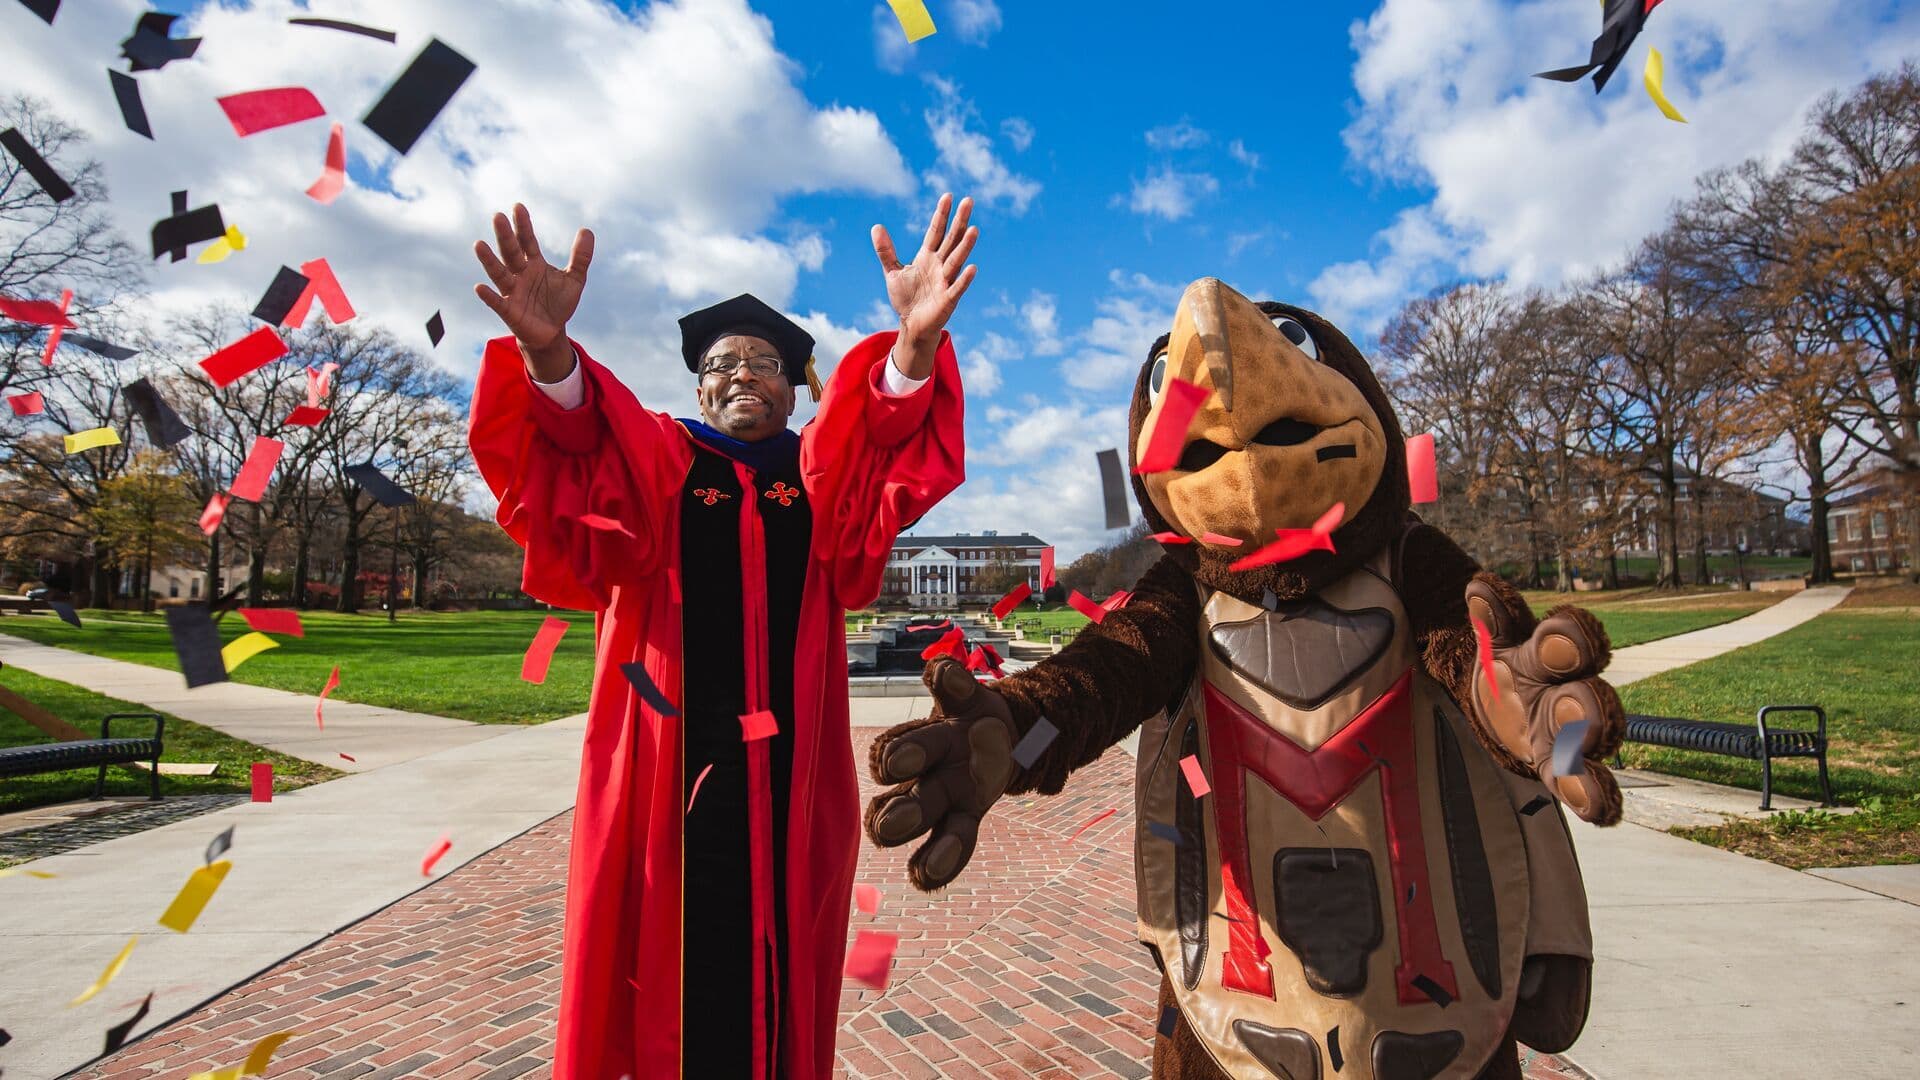 University of Maryland President, Darryl J. Pines, and the school's mascot, Testudo, celebrate and throw confetti.